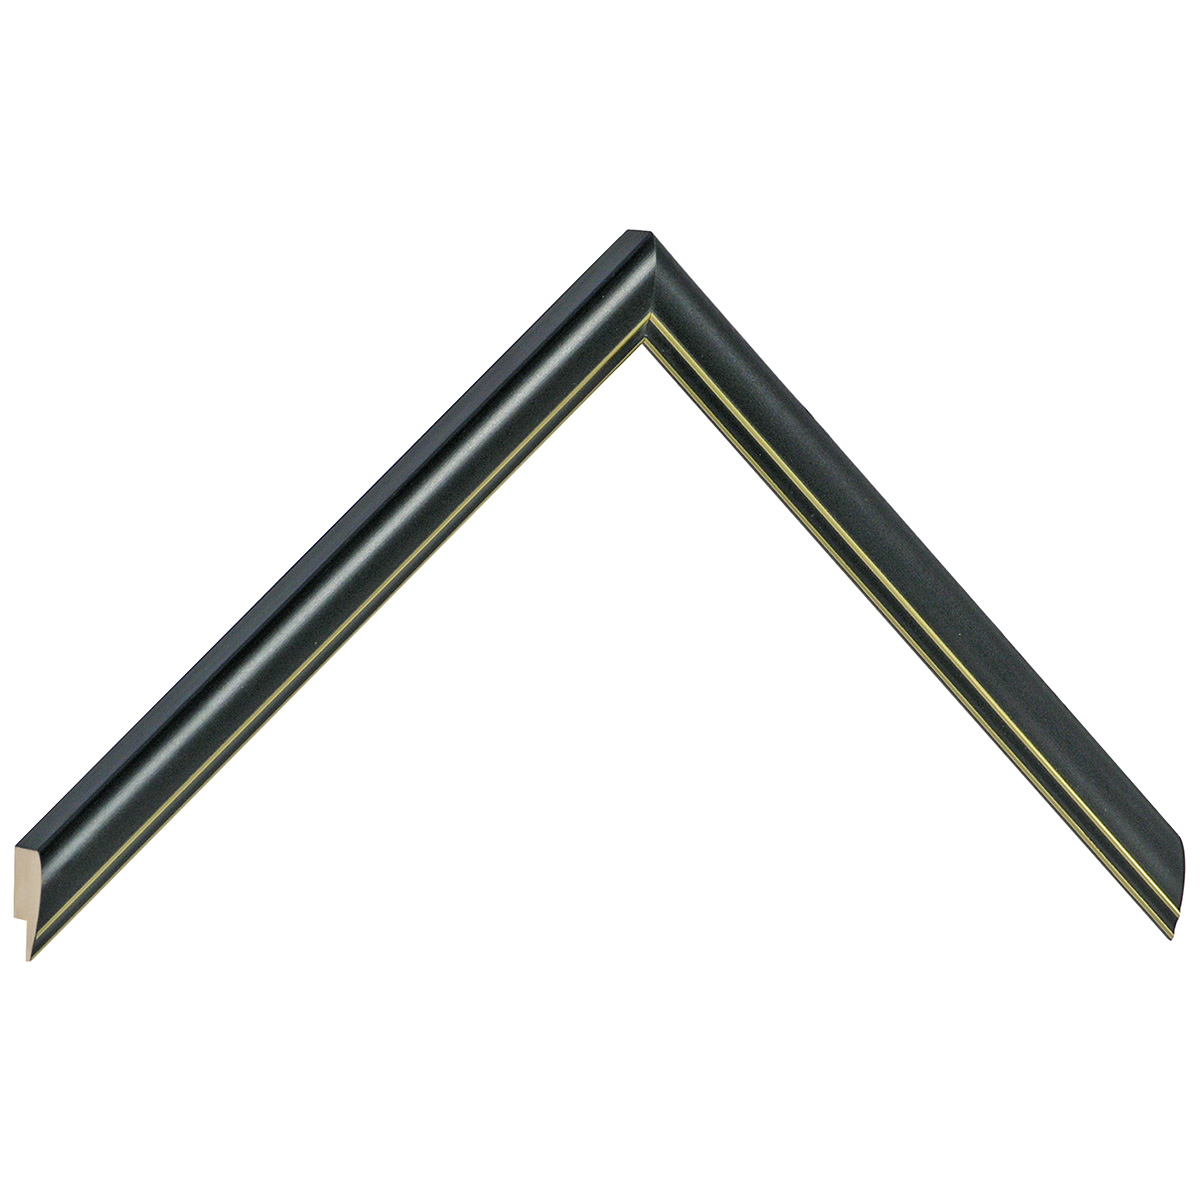 Moulding ayous jointed 13mm - black with golden edge - Sample